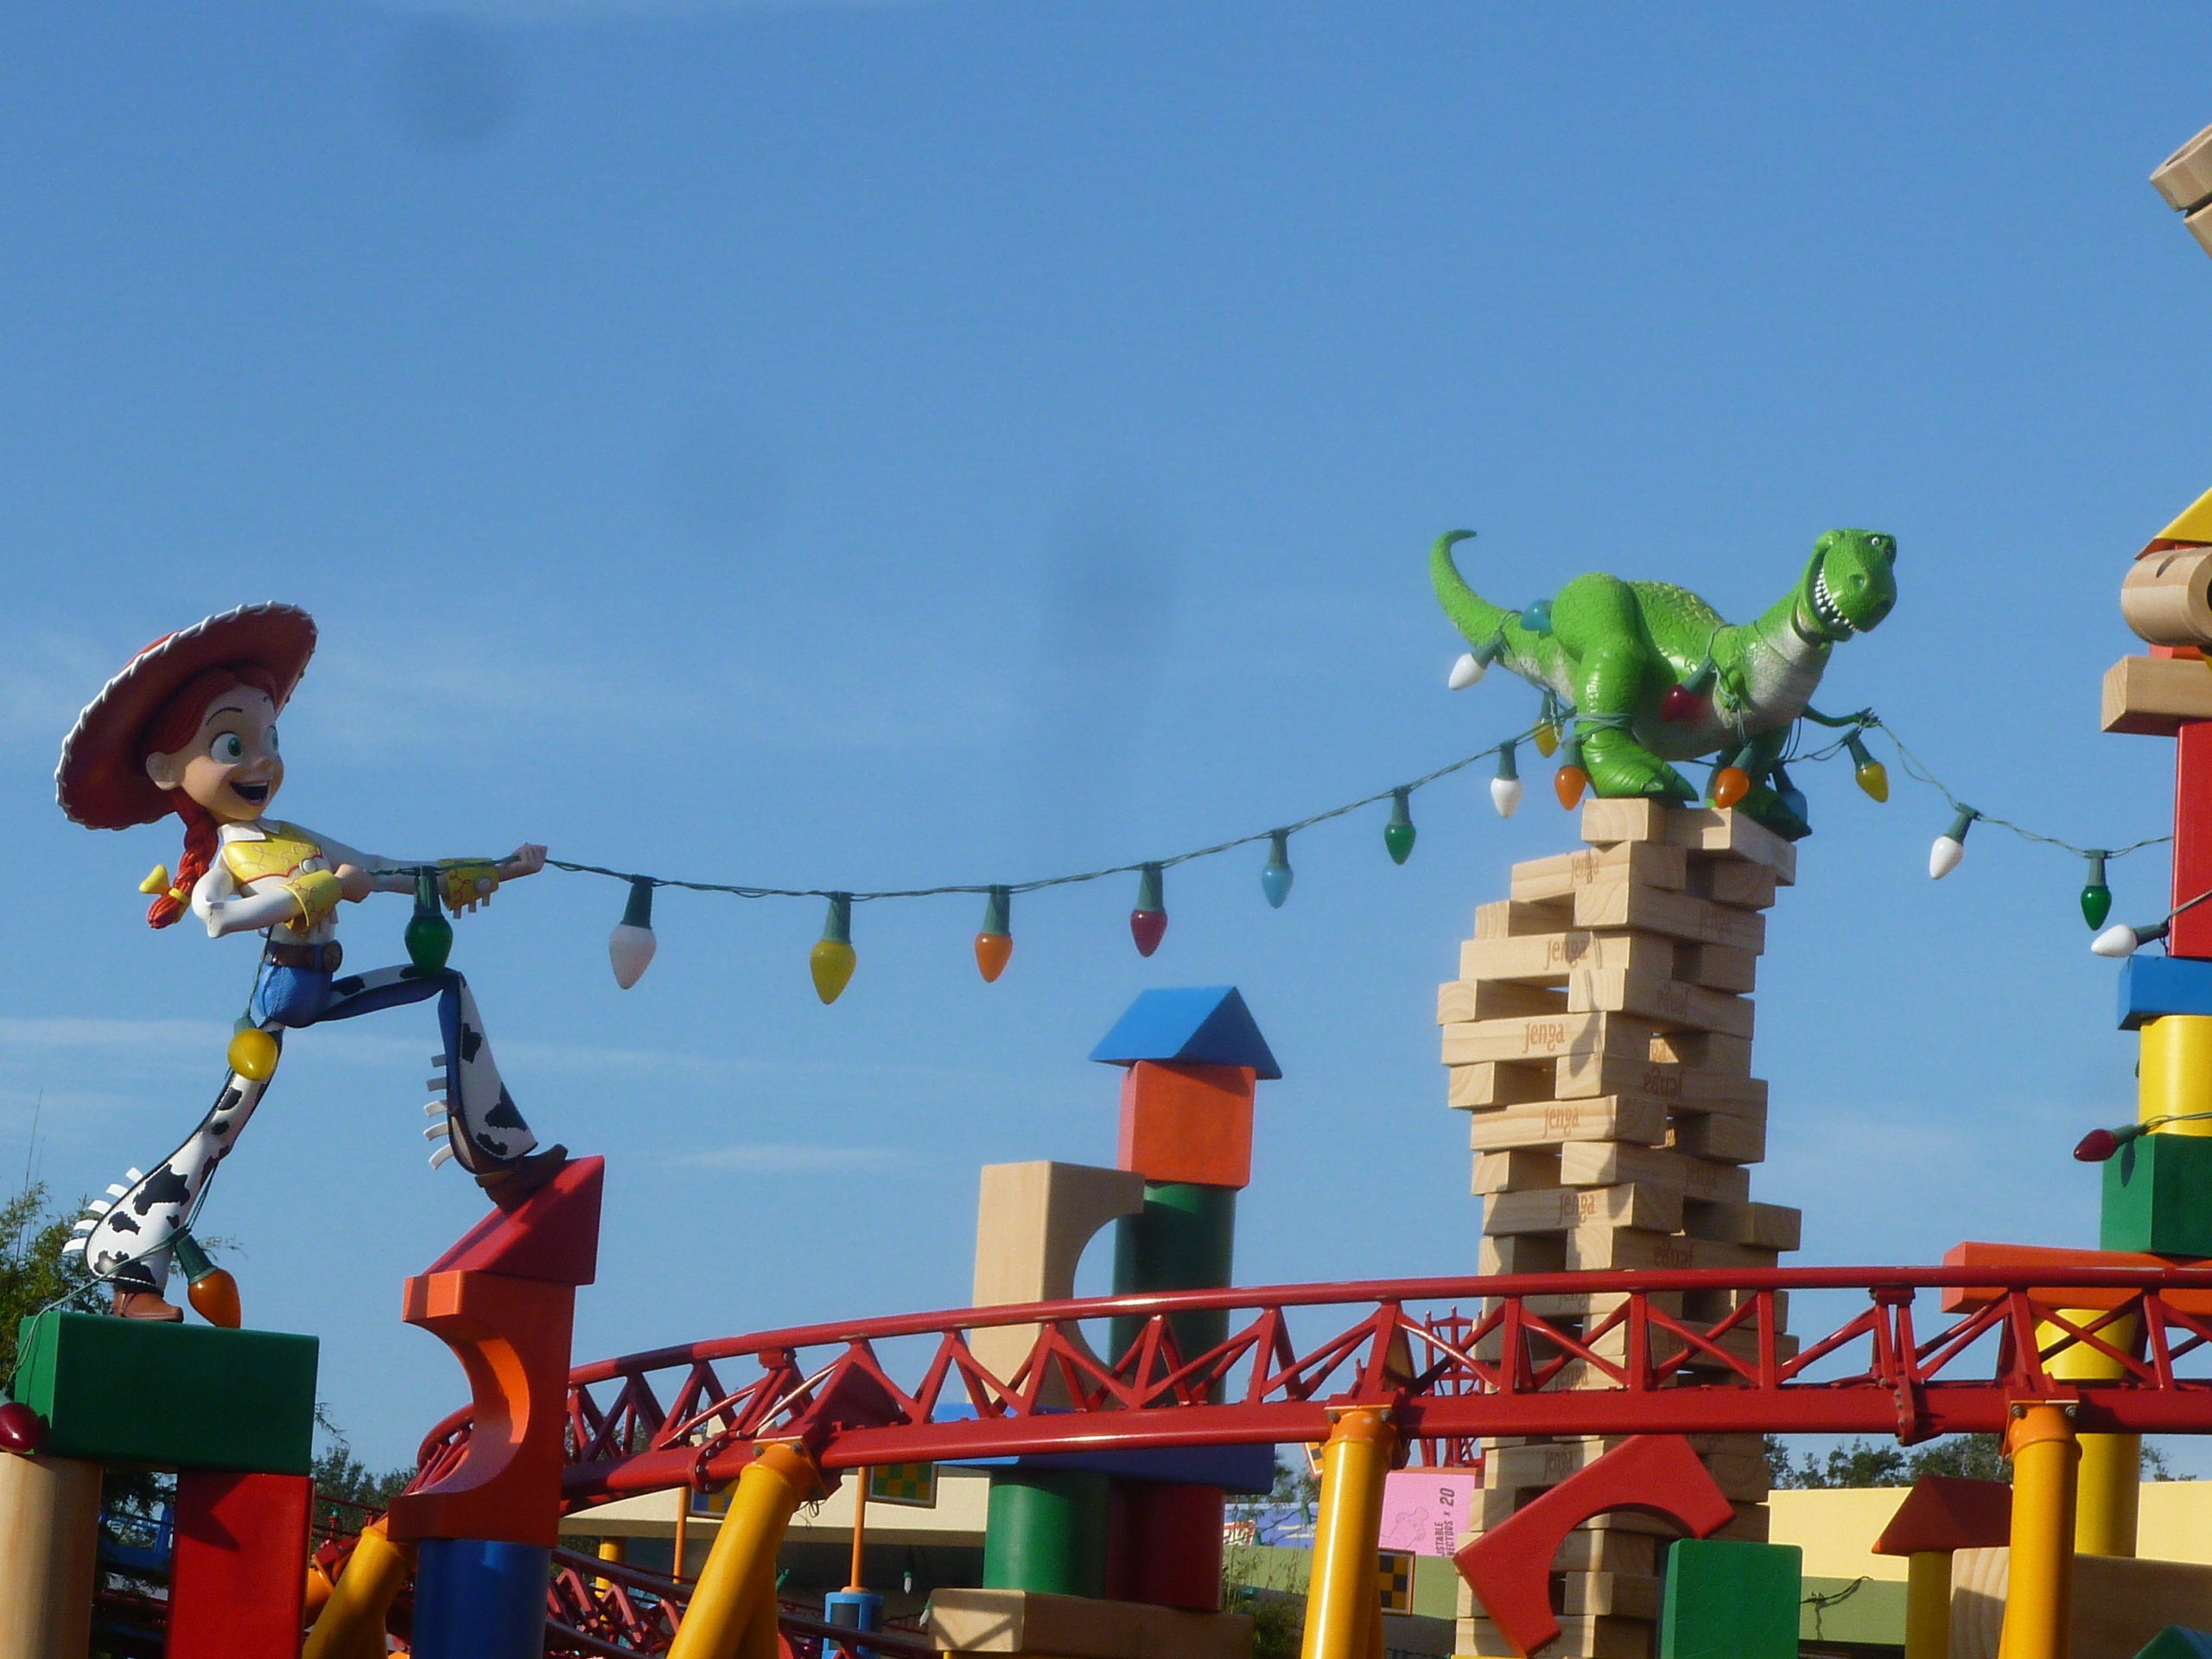 Photo of Toy Story Land in Hollywood Studios Disney World.  A giant Jessie from the movie Toy Story, along with Rex the dinosaur string Christmas lights in "Andy's backyard" amongst giagantic toy blocks, car track (which is also a roller coaster track) and Jenga blocks. 